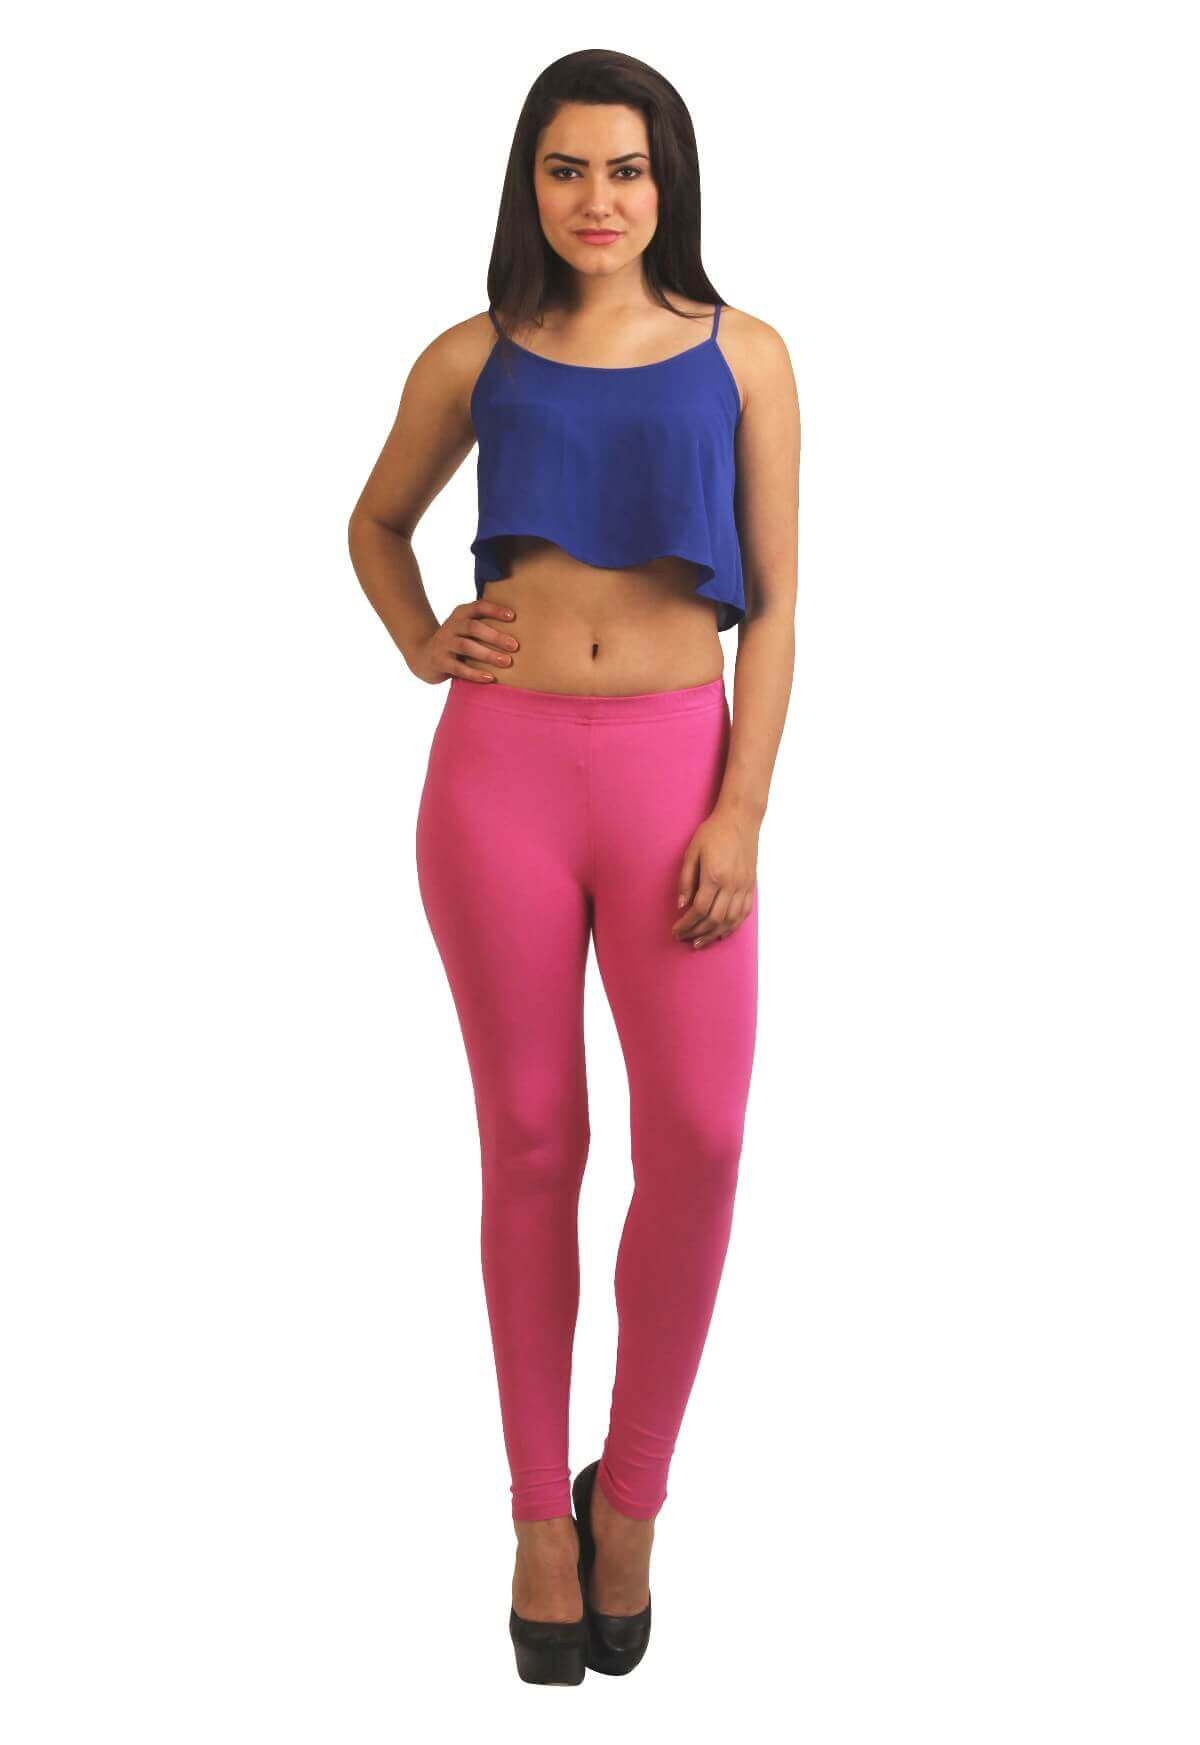 Frenchtrendz  Buy Frenchtrendz Cotton Spandex Dark Pink Ankle Leggings  Online India